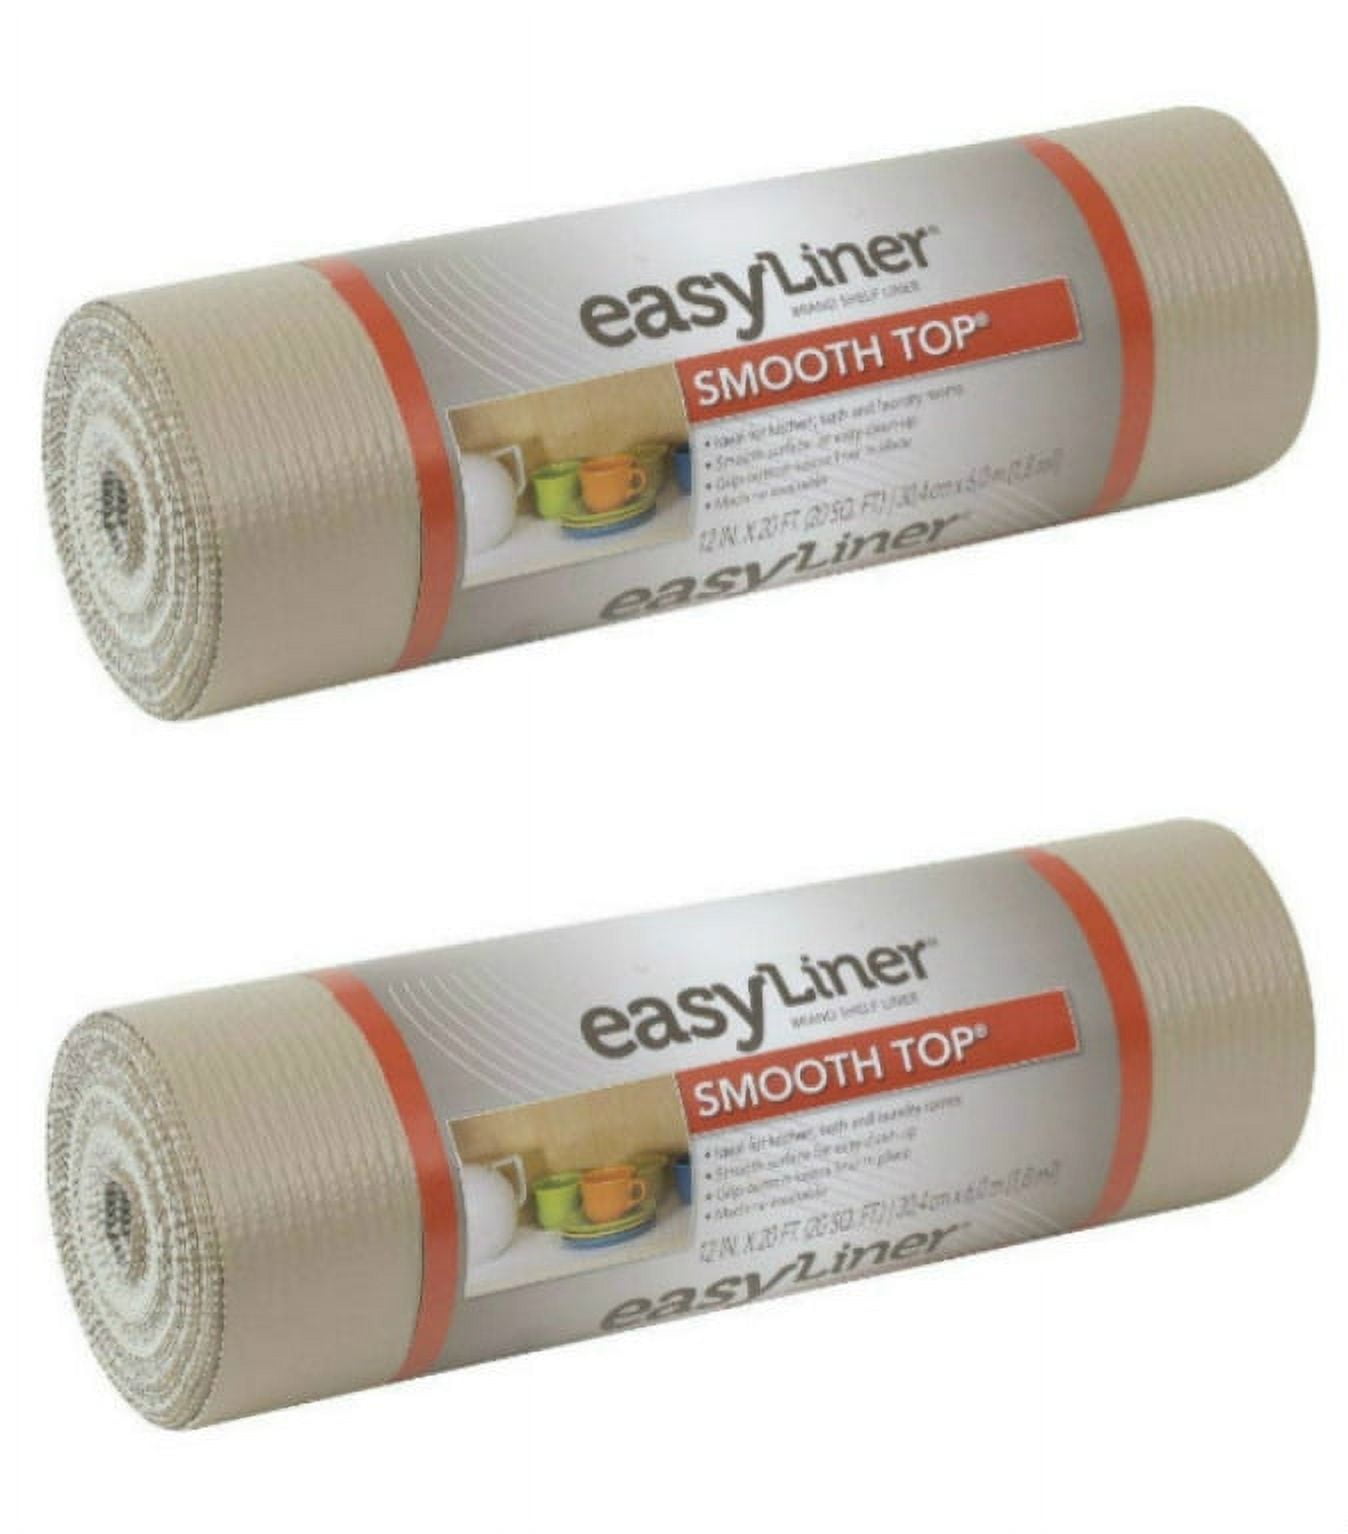 Duck Solid Grip EasyLiner Non Adhesive Shelf Liner with Clorox, 6 pk, 20 x  6' White